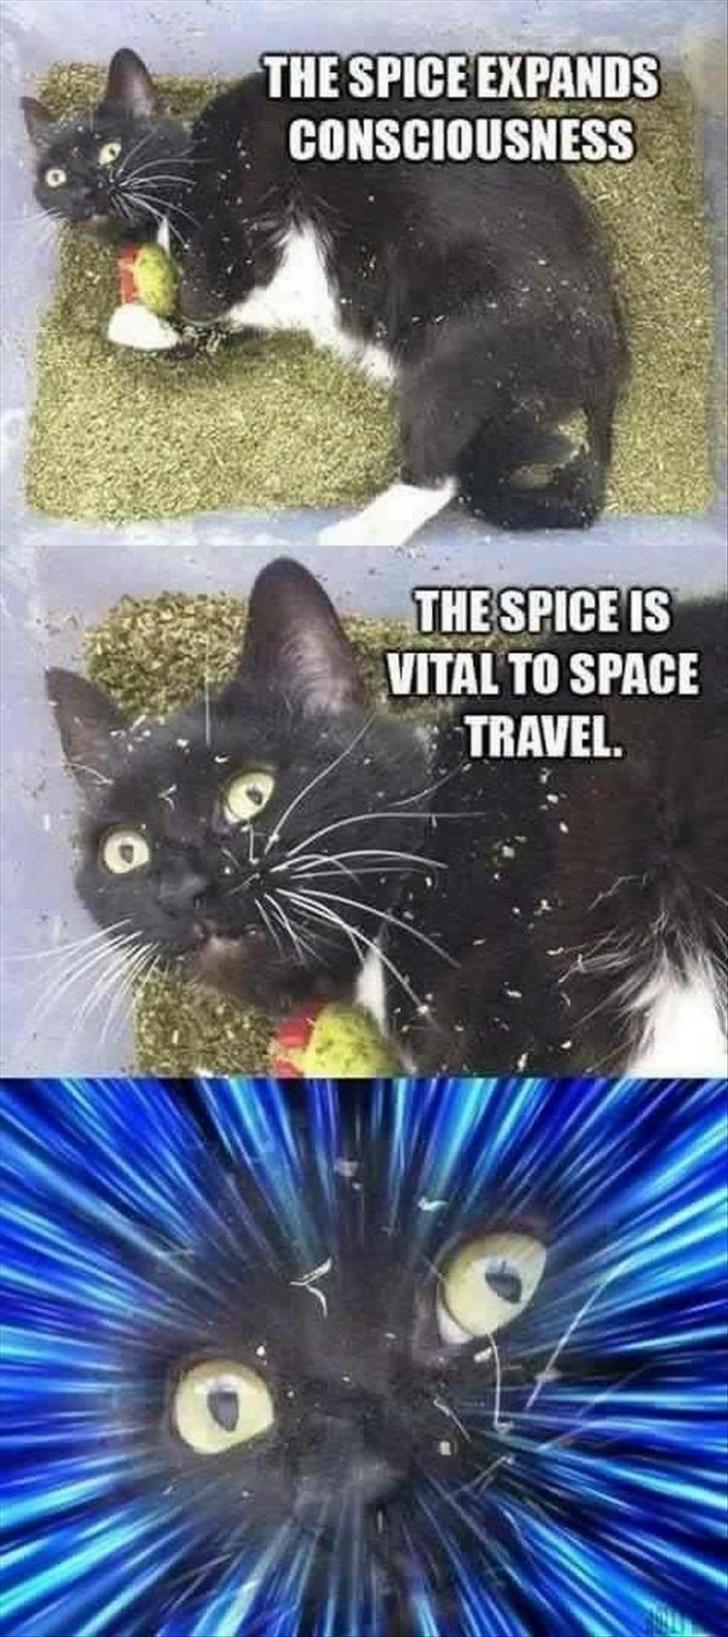 He who controls the spice...